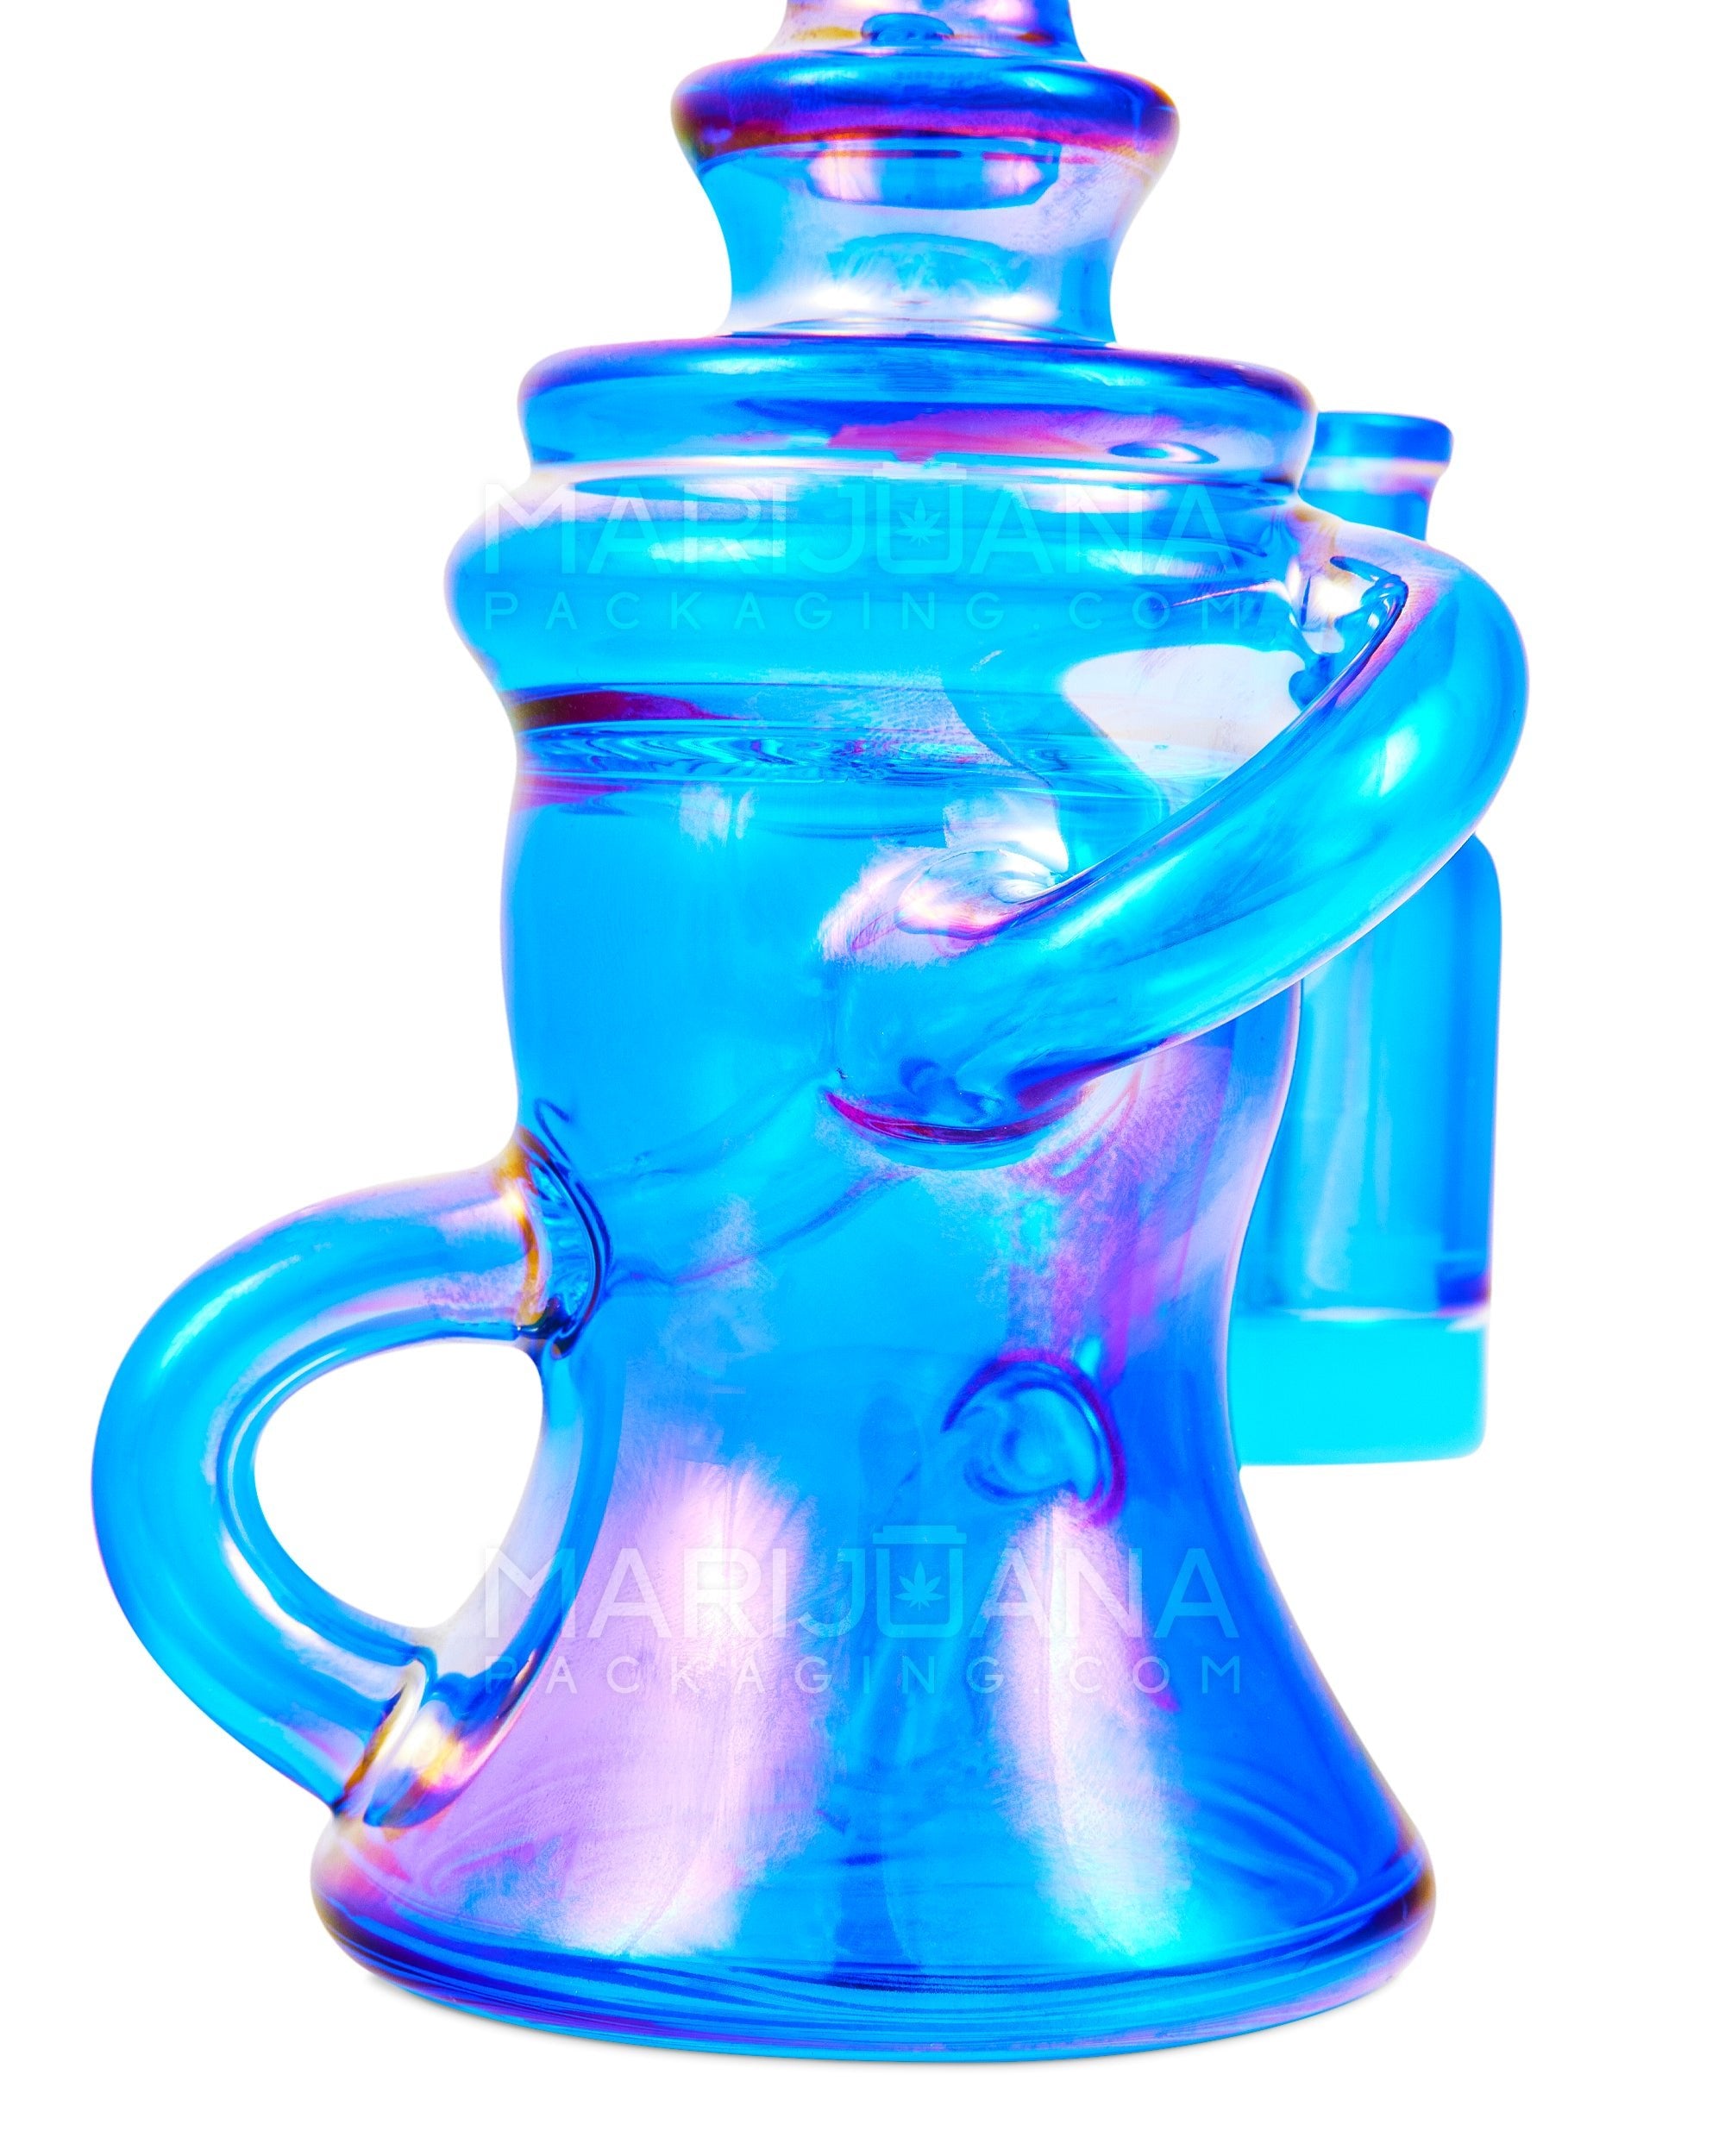 Bent Neck Iridescent Recycler Glass Dab Rig w/ Silicone Claim Catcher | 7in Tall - 14mm Banger - Blue - 4